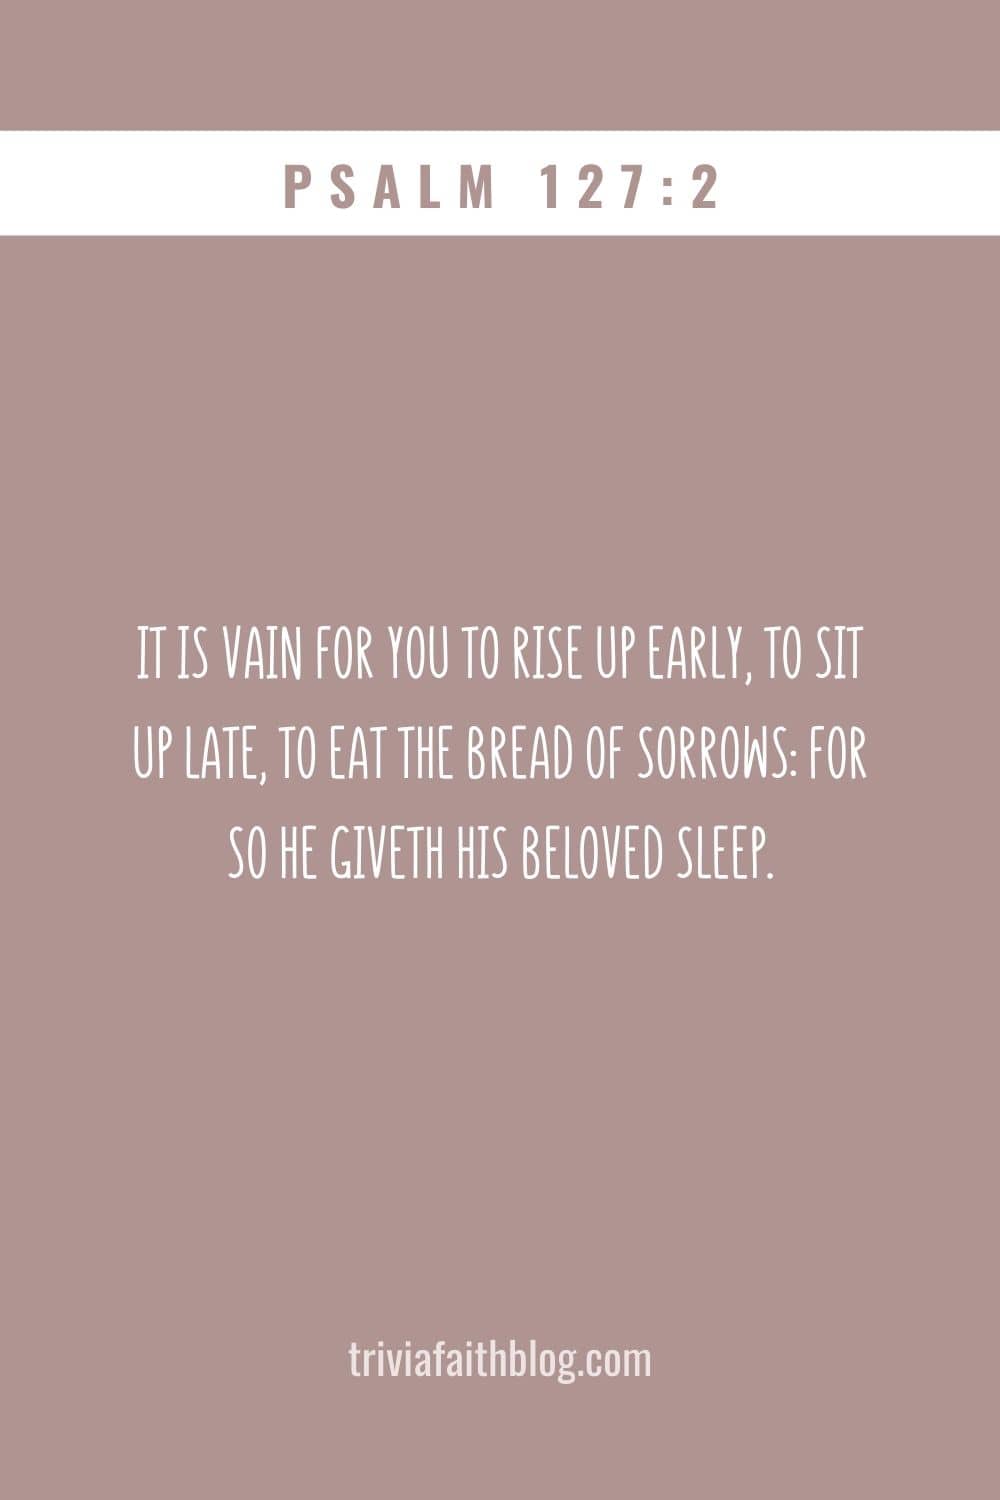 It is vain for you to rise up early, to sit up late, to eat the bread of sorrows for so he giveth his beloved sleep